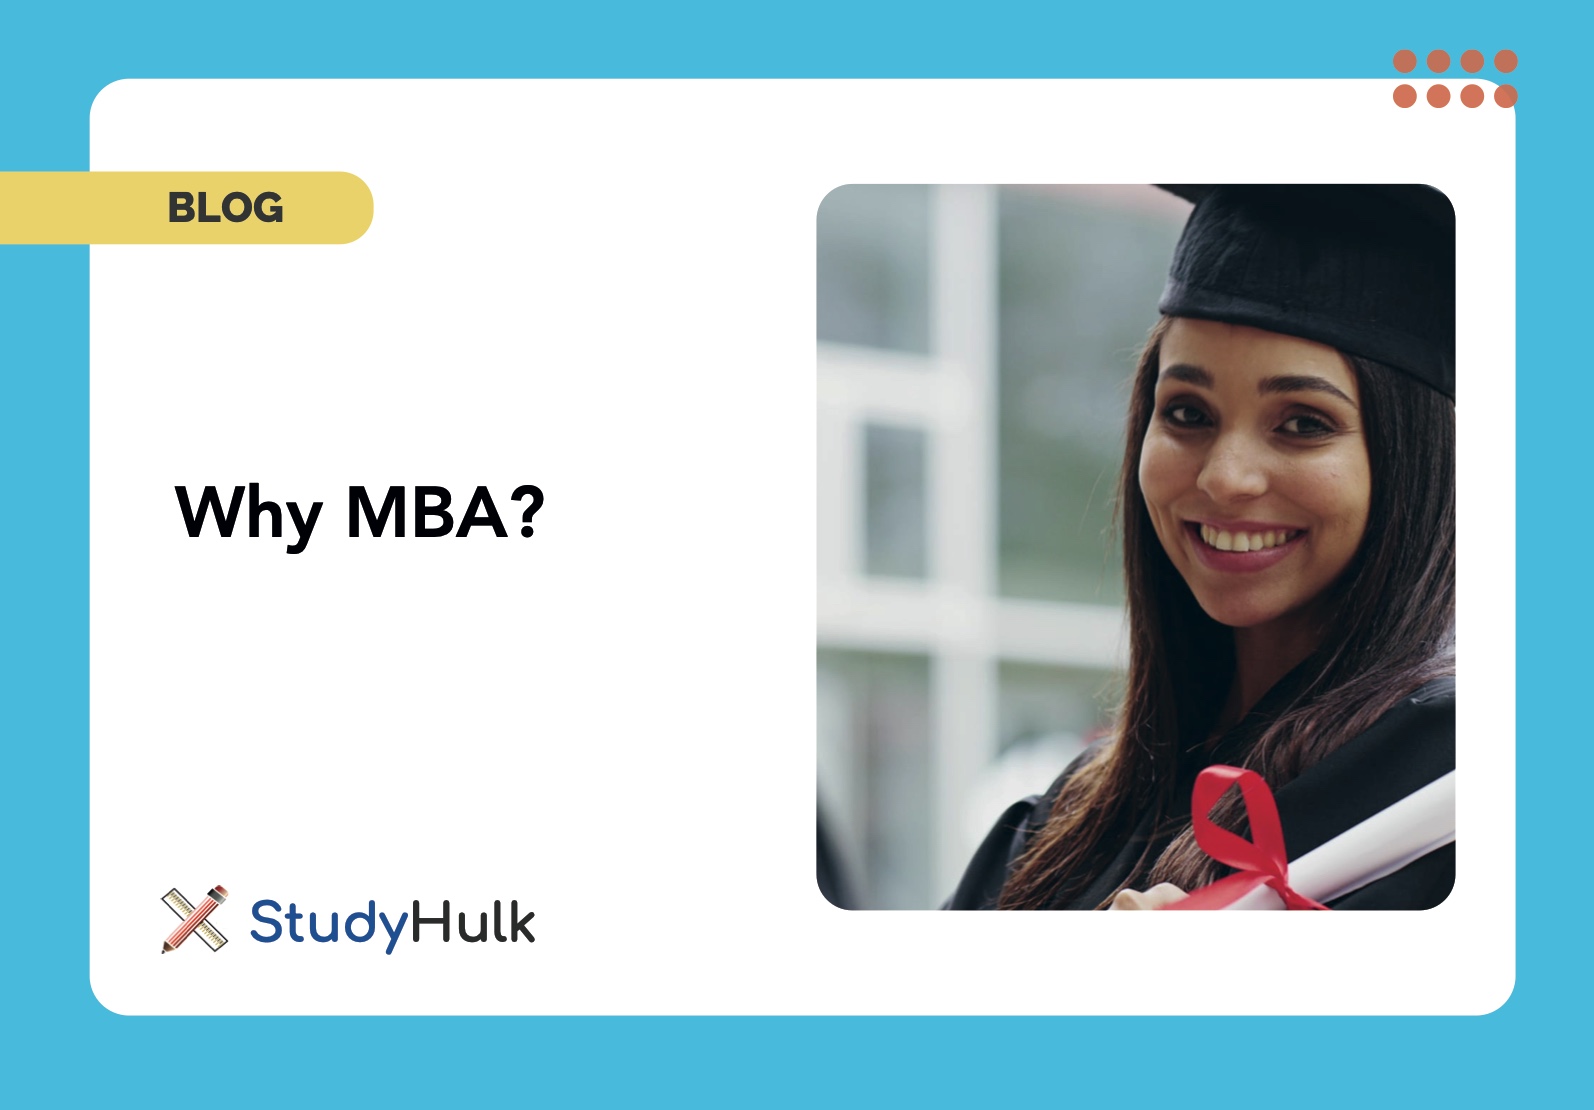 Blog post for Why MBA